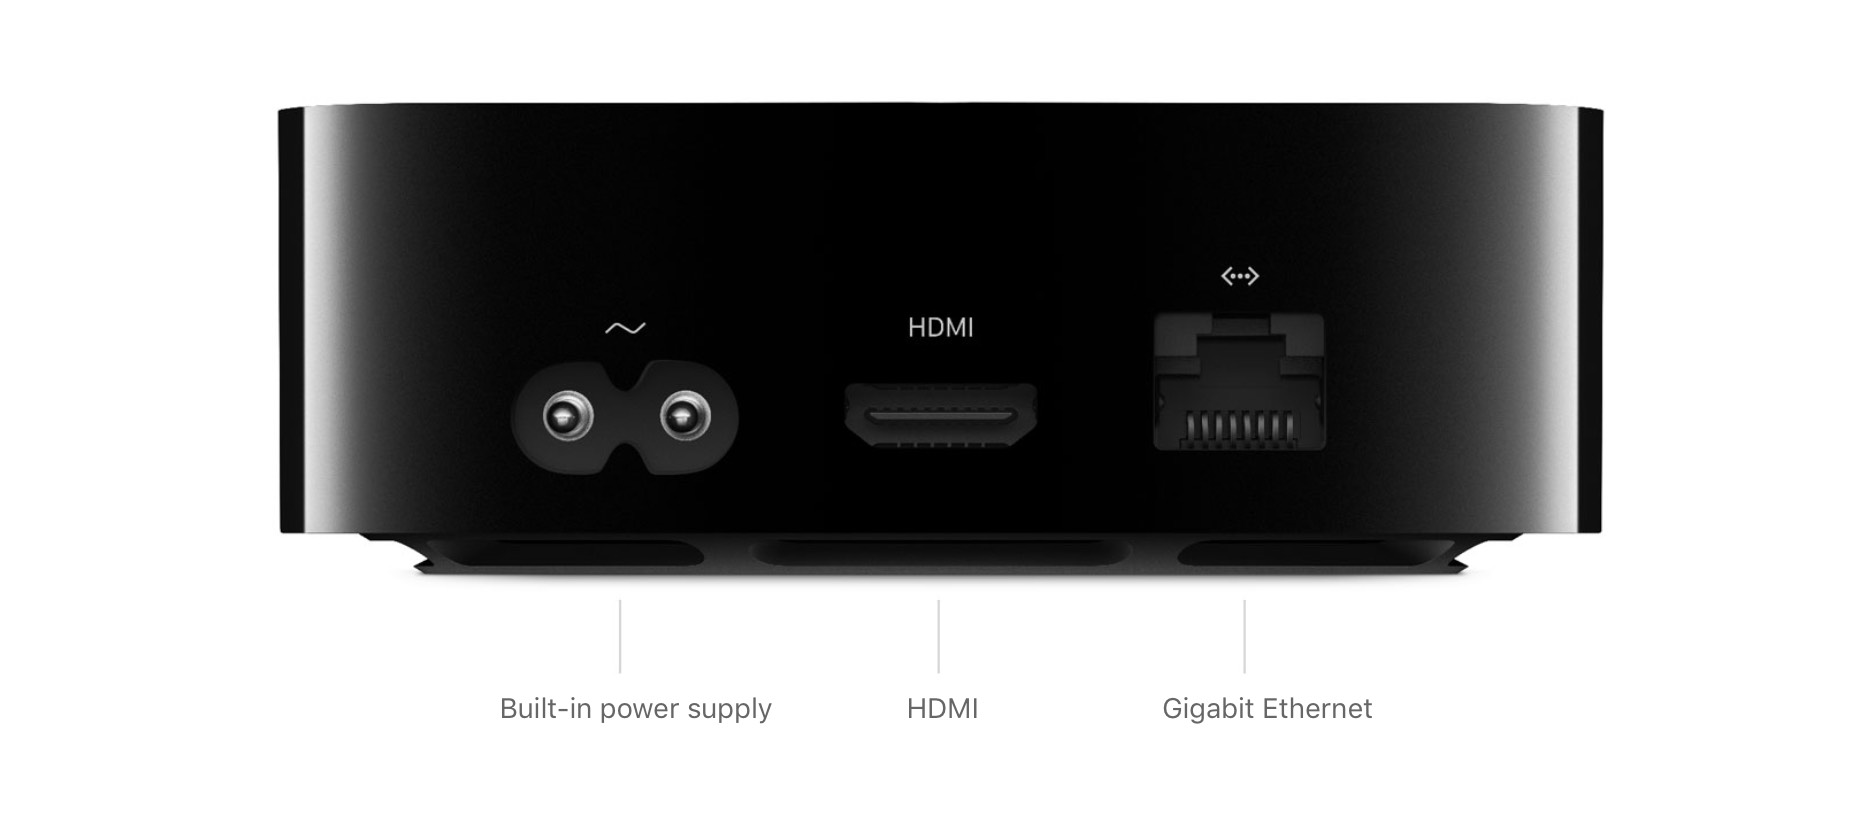 Apple TV no longer needs the USB-C port because can connect to it wirelessly